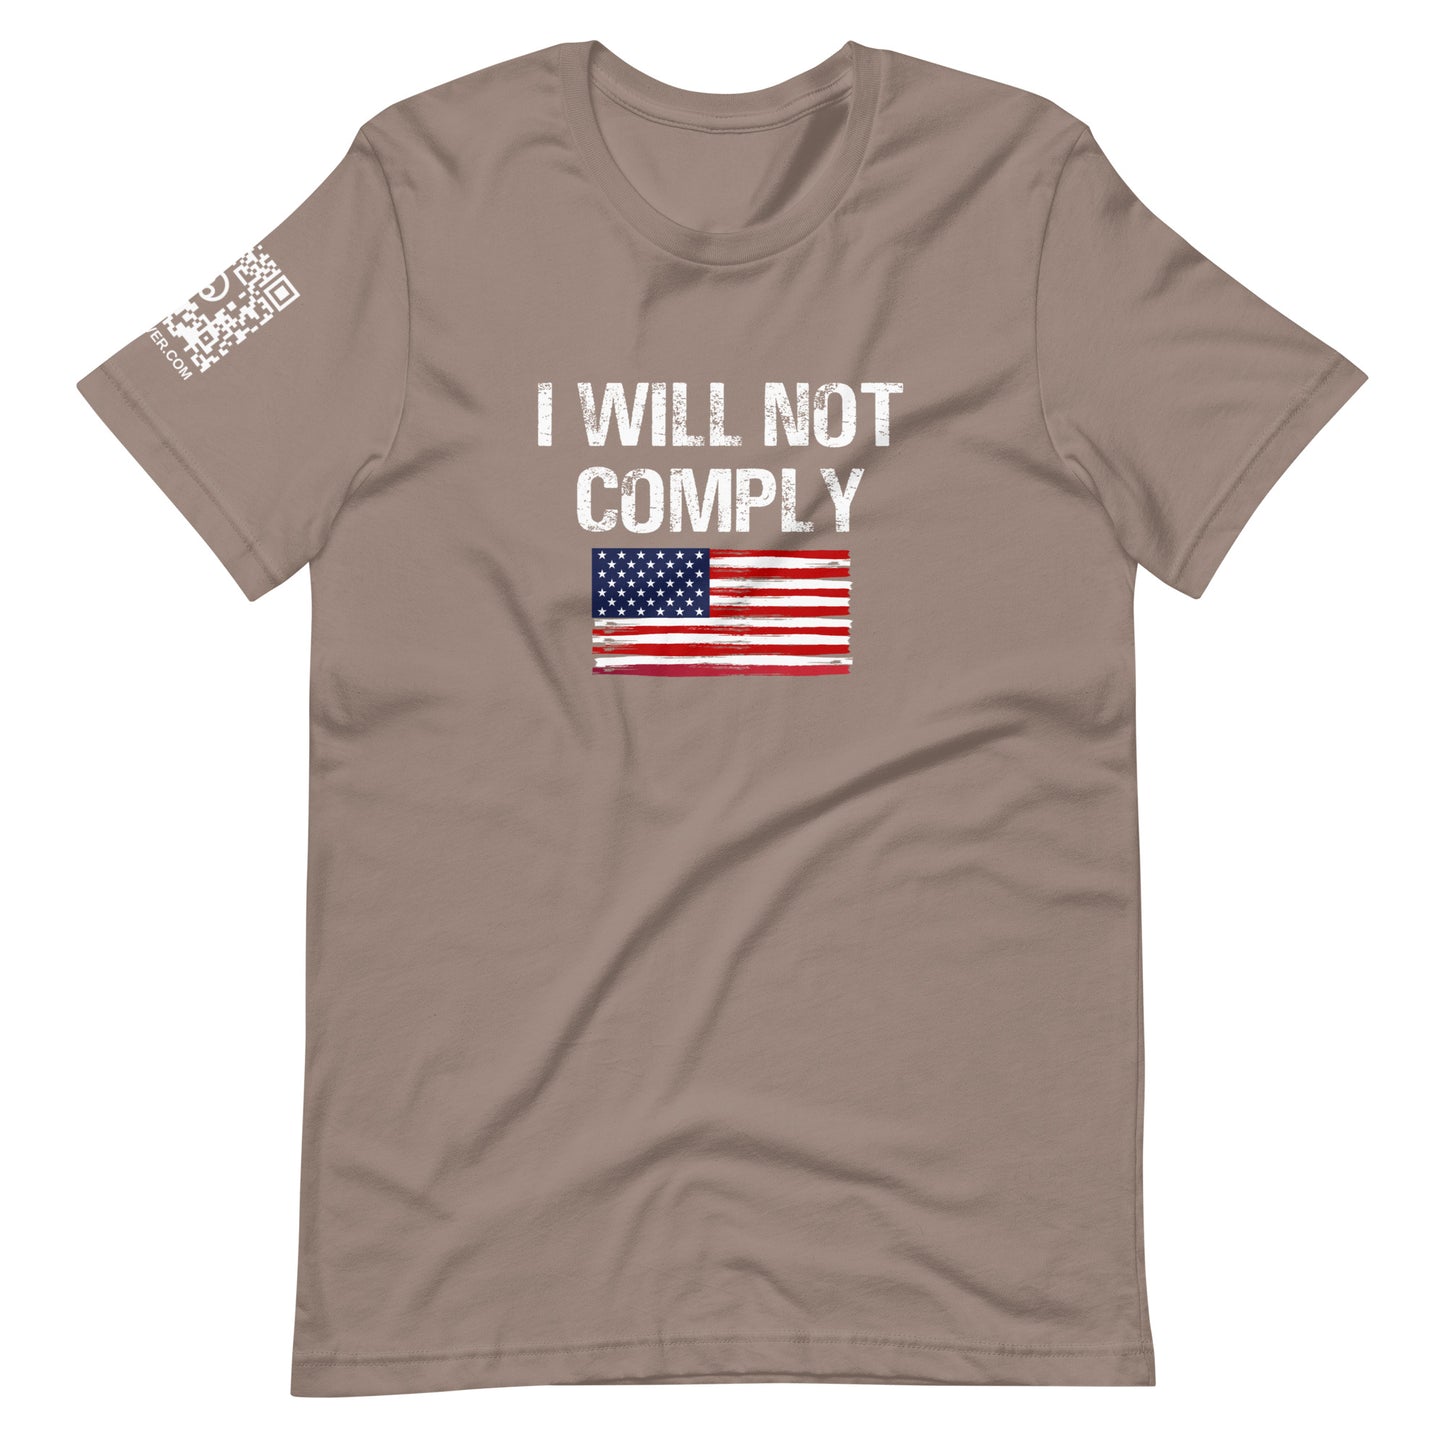 I Will Not Comply Unisex t-shirt